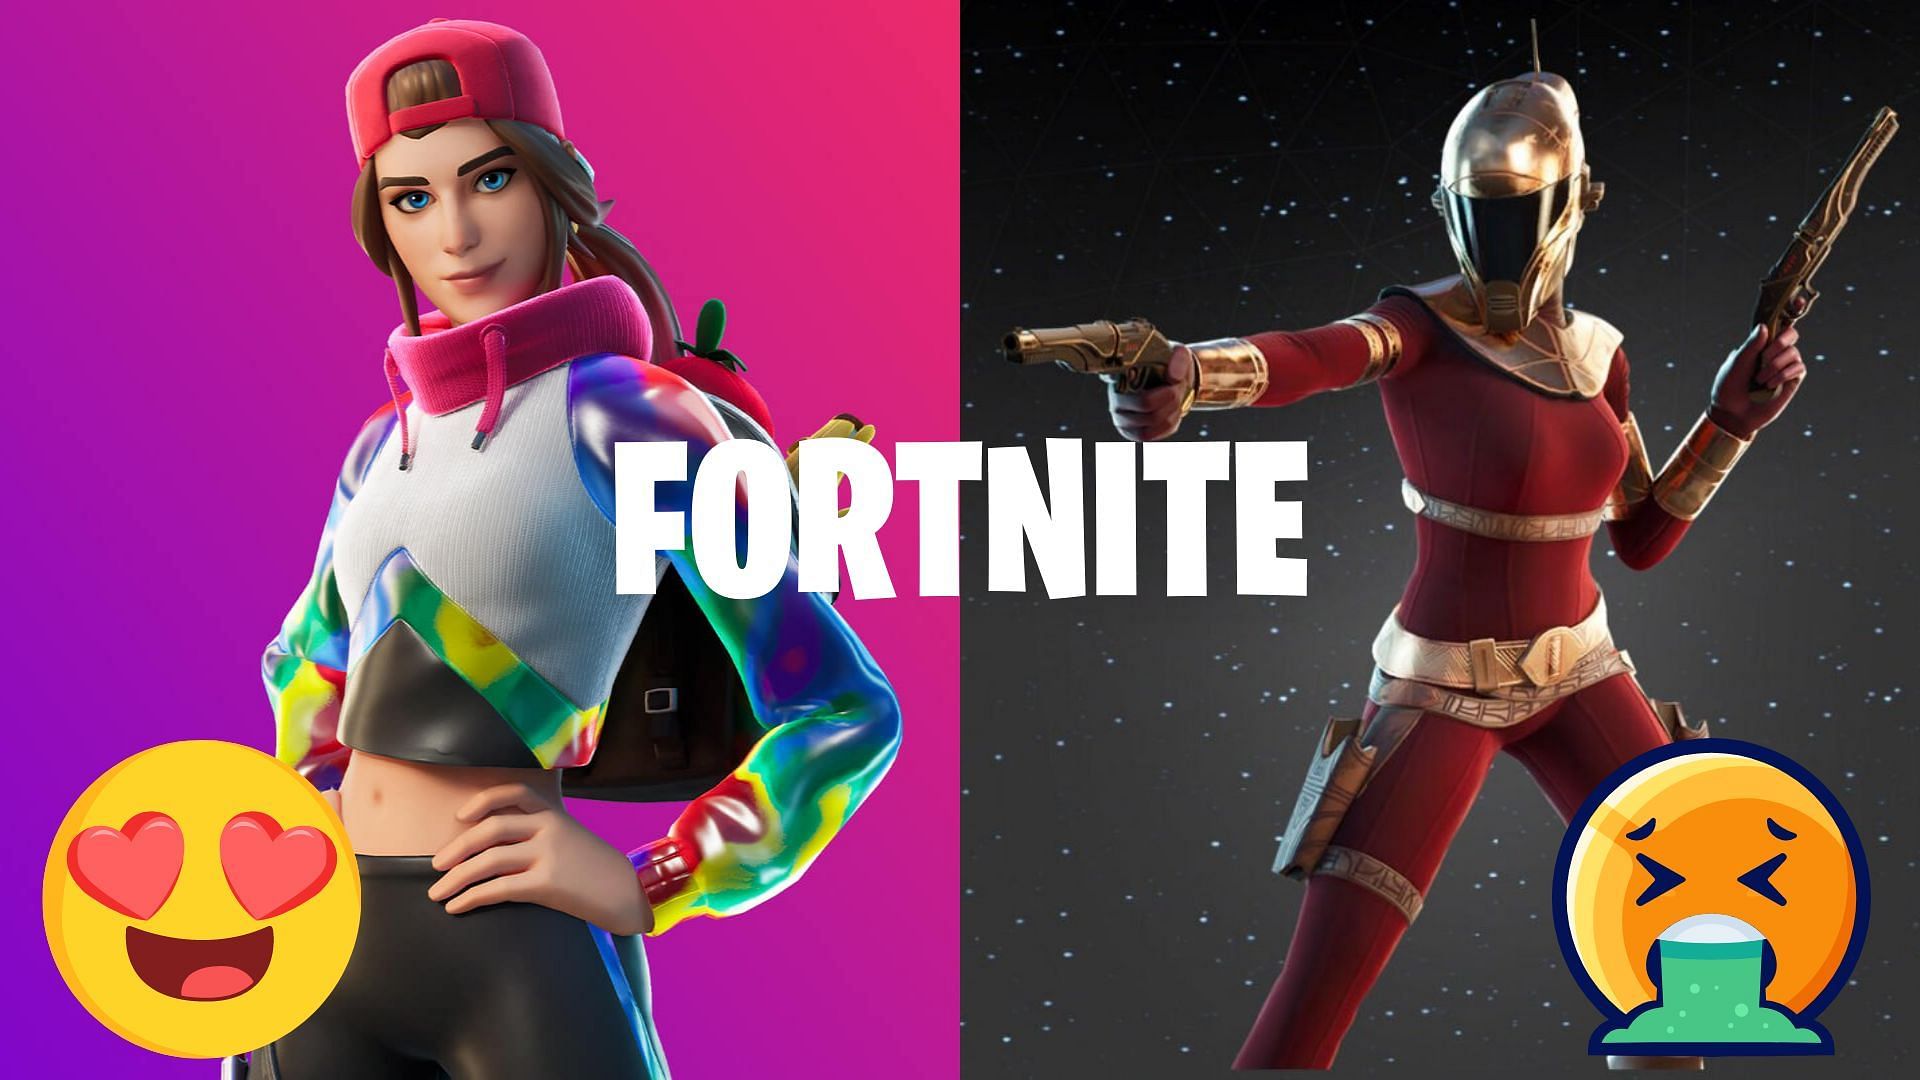 Female skins in Fortnite have a chequered history (Image via Sportskeeda)